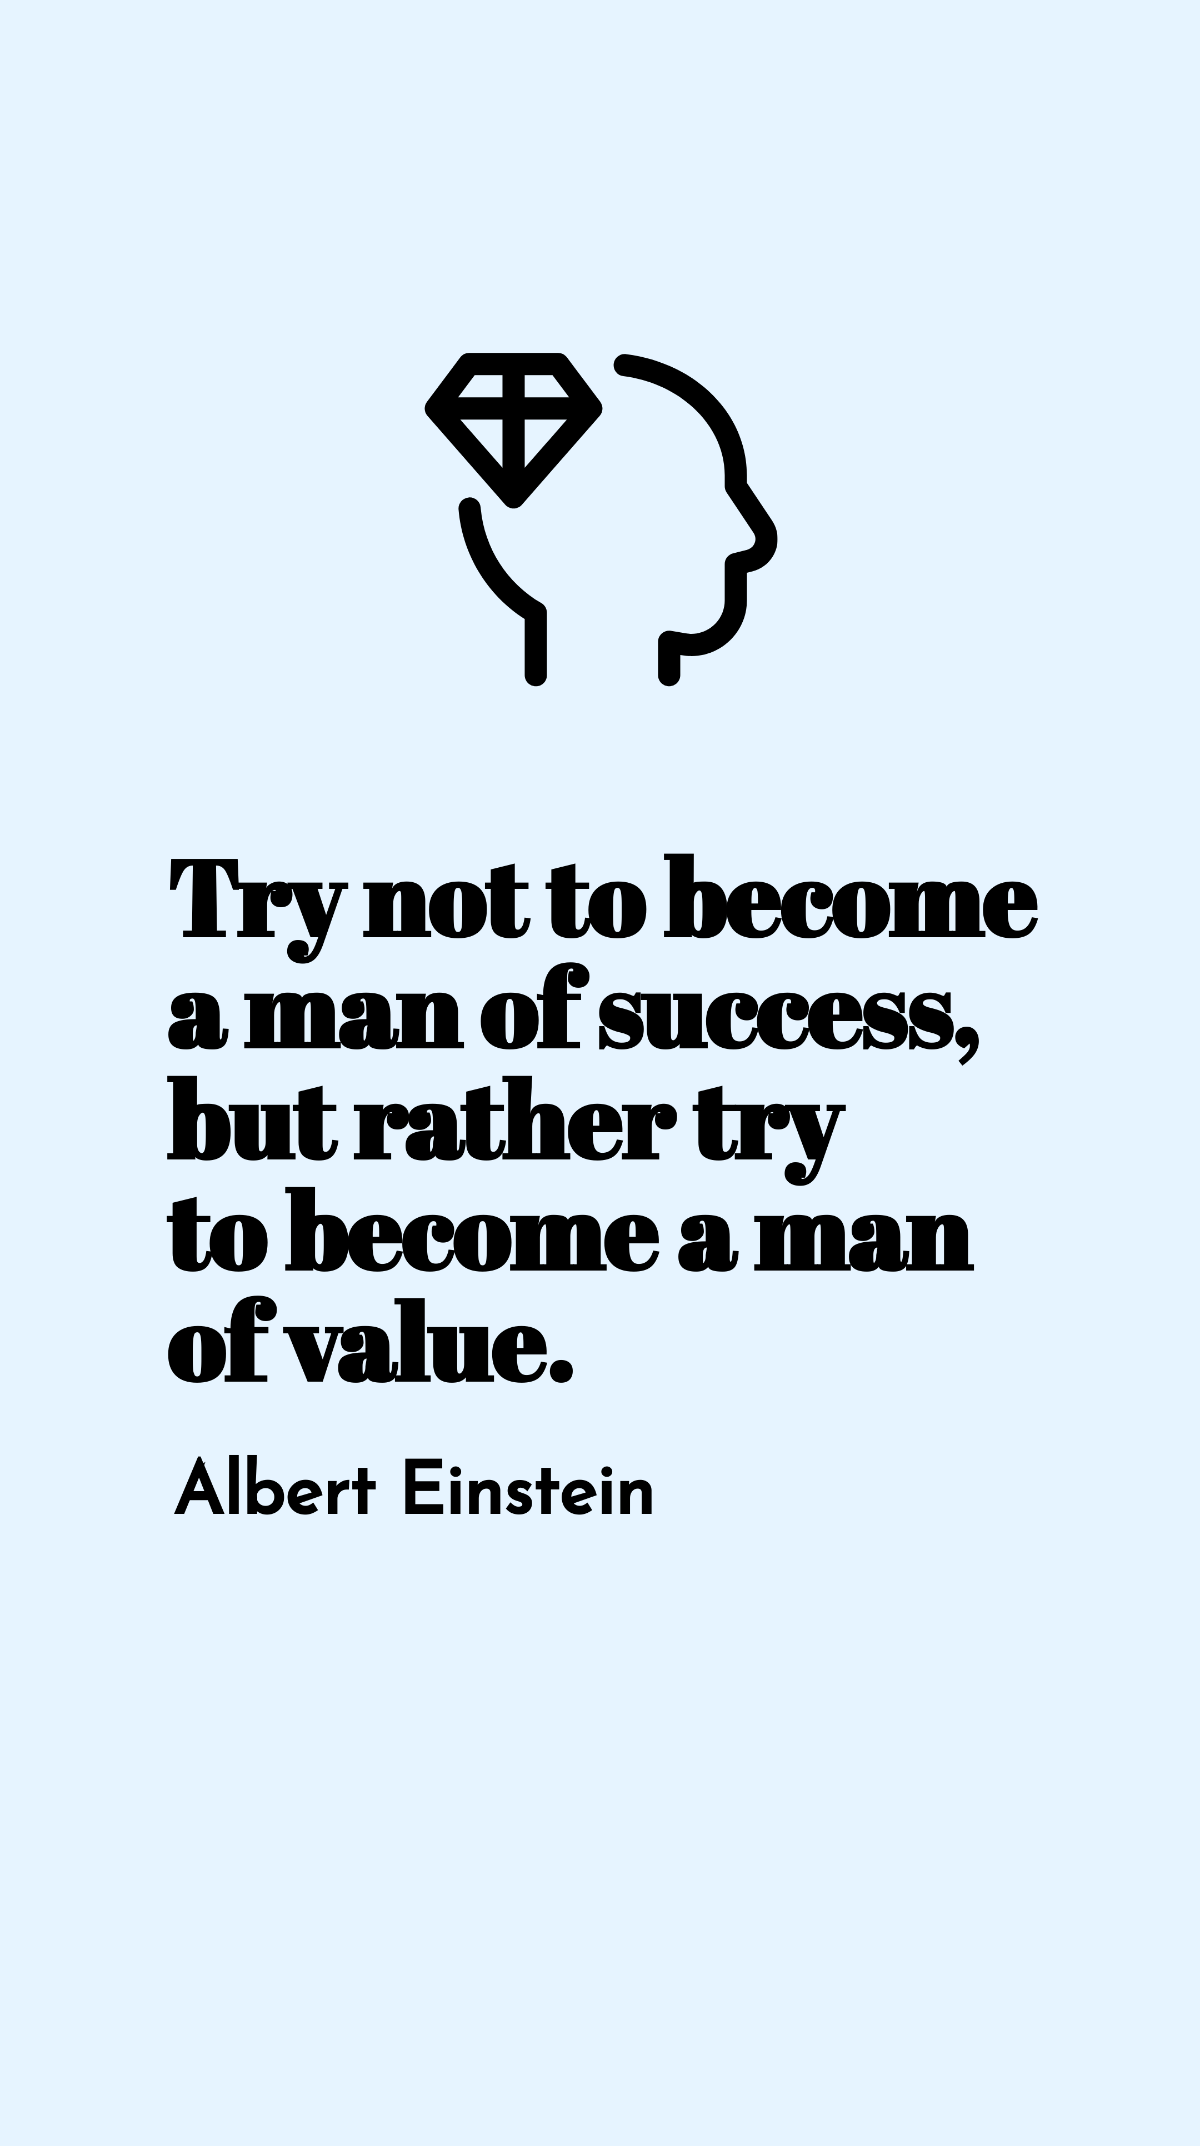 Albert Einstein - Try not to become a man of success, but rather try to become a man of value.